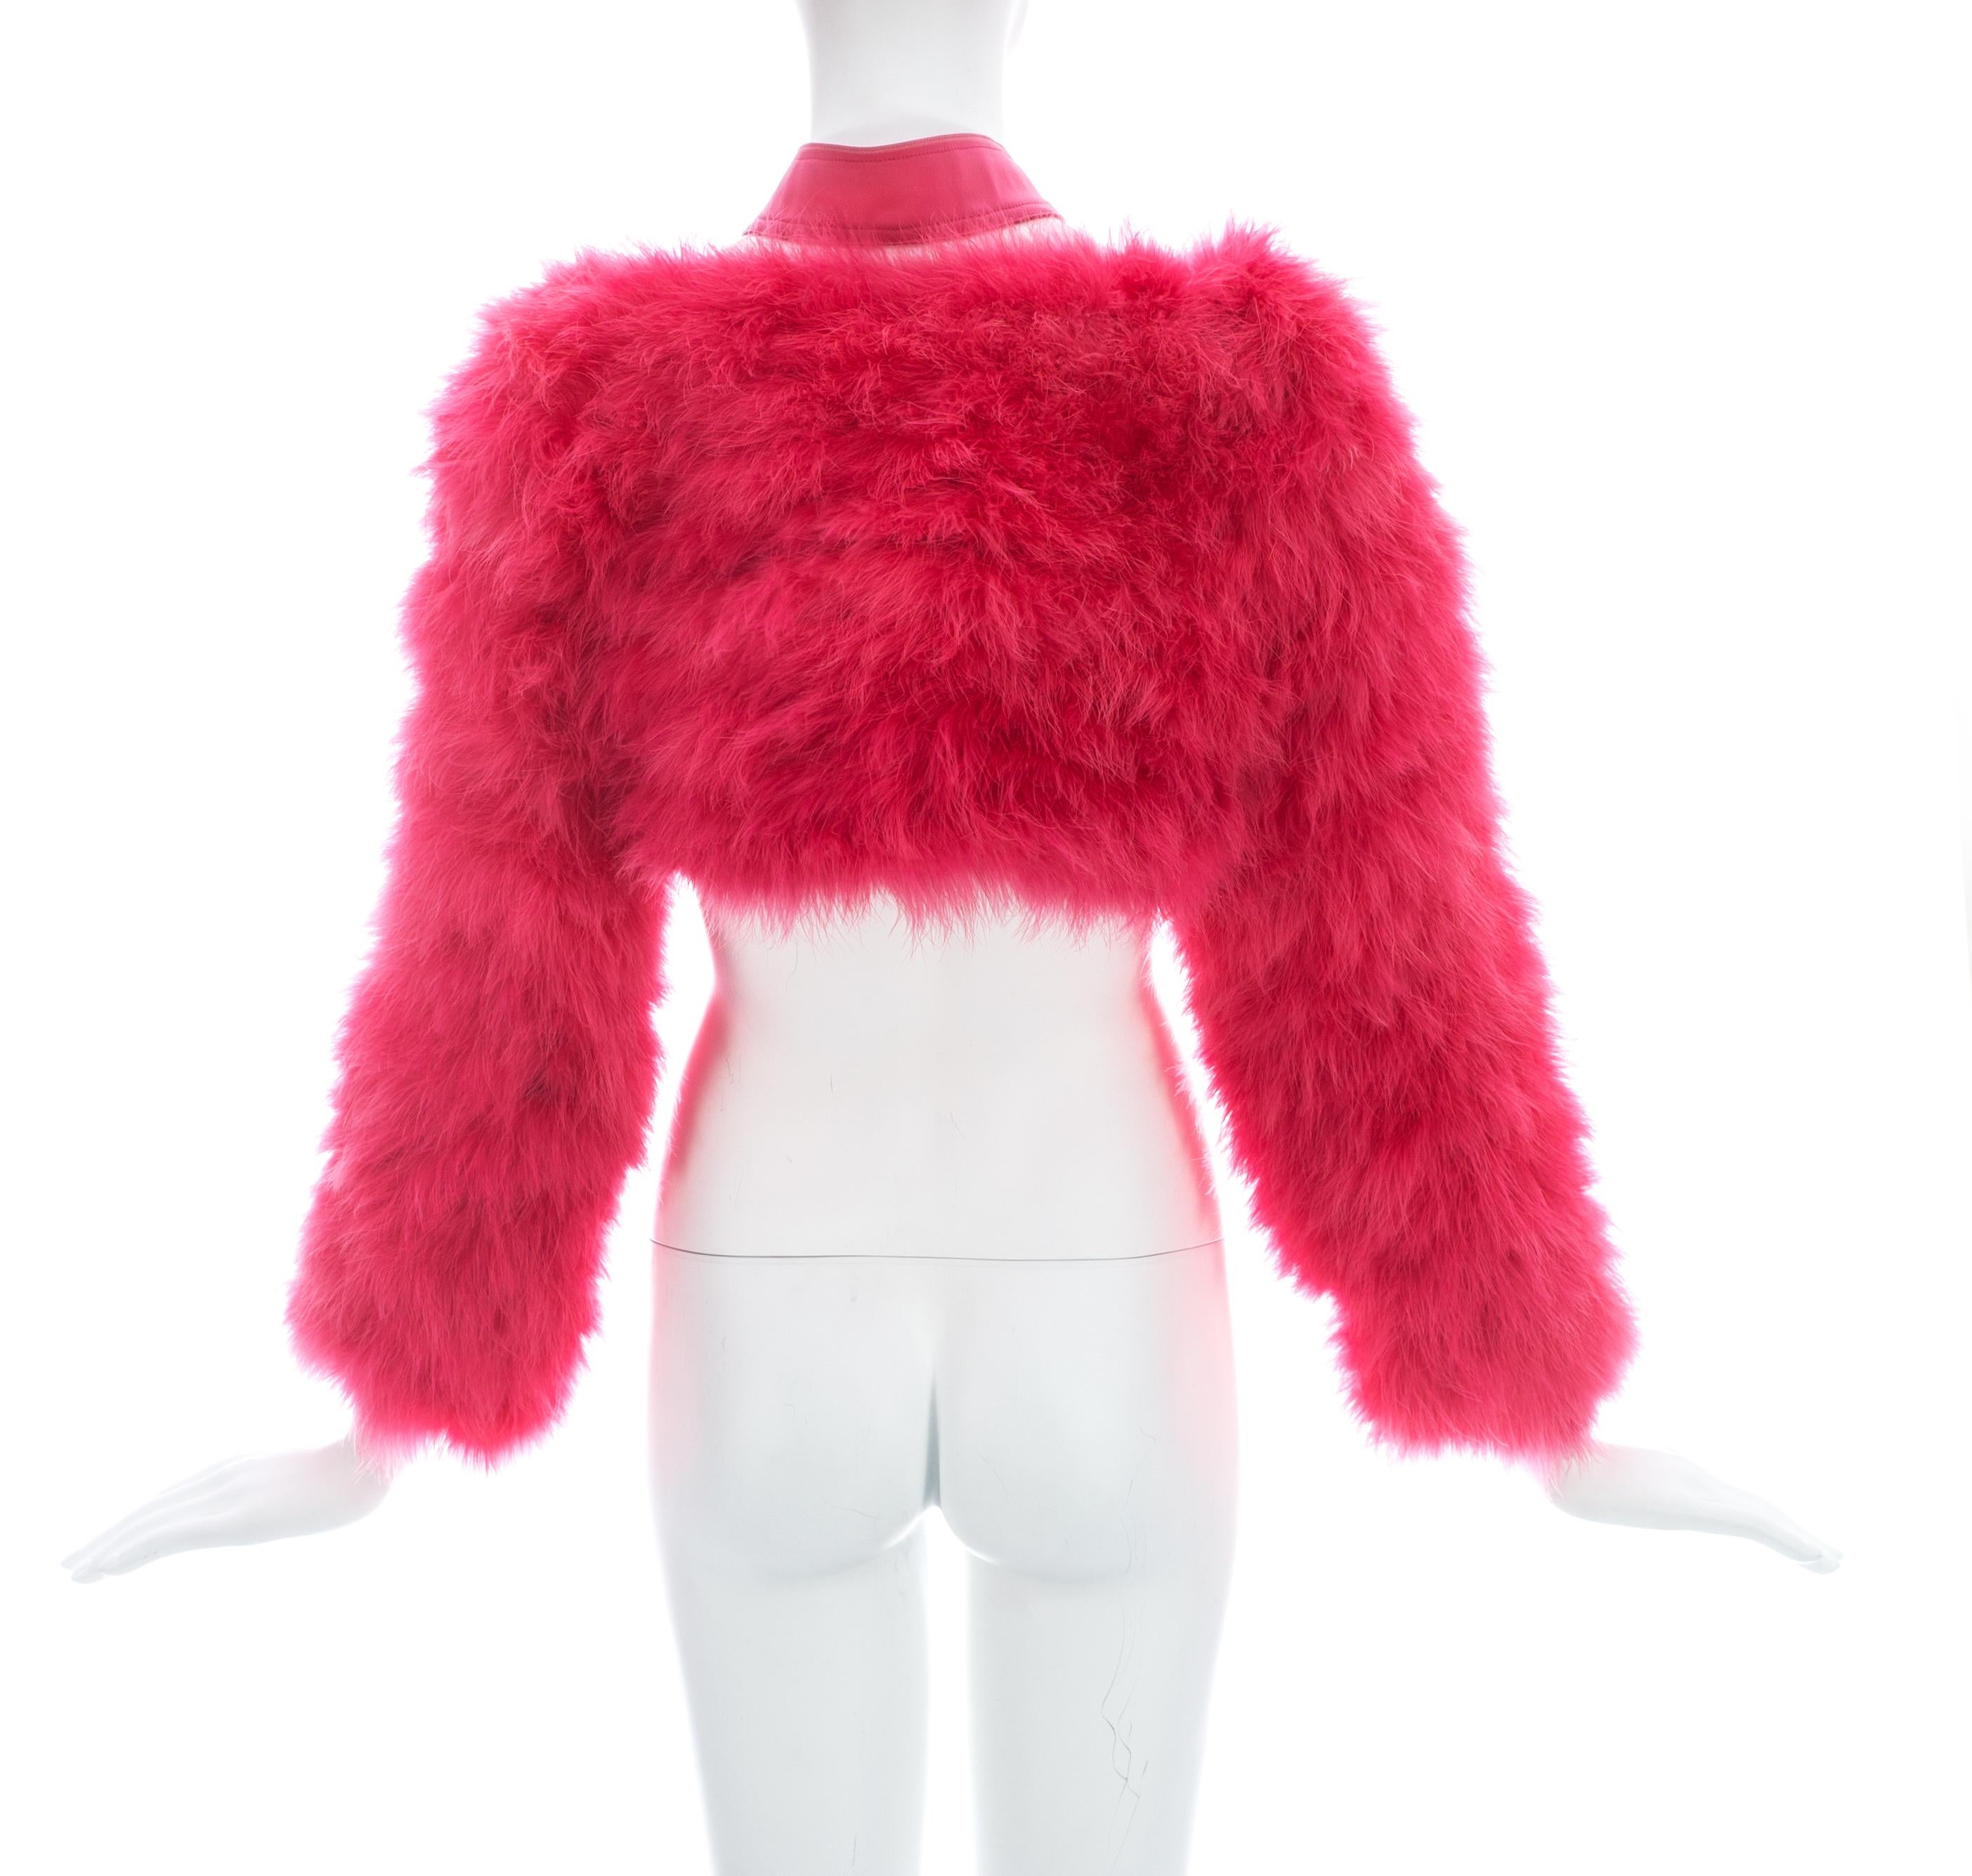 Women's Gucci by Tom Ford pink marabou bolero jacket, S/S 2004 